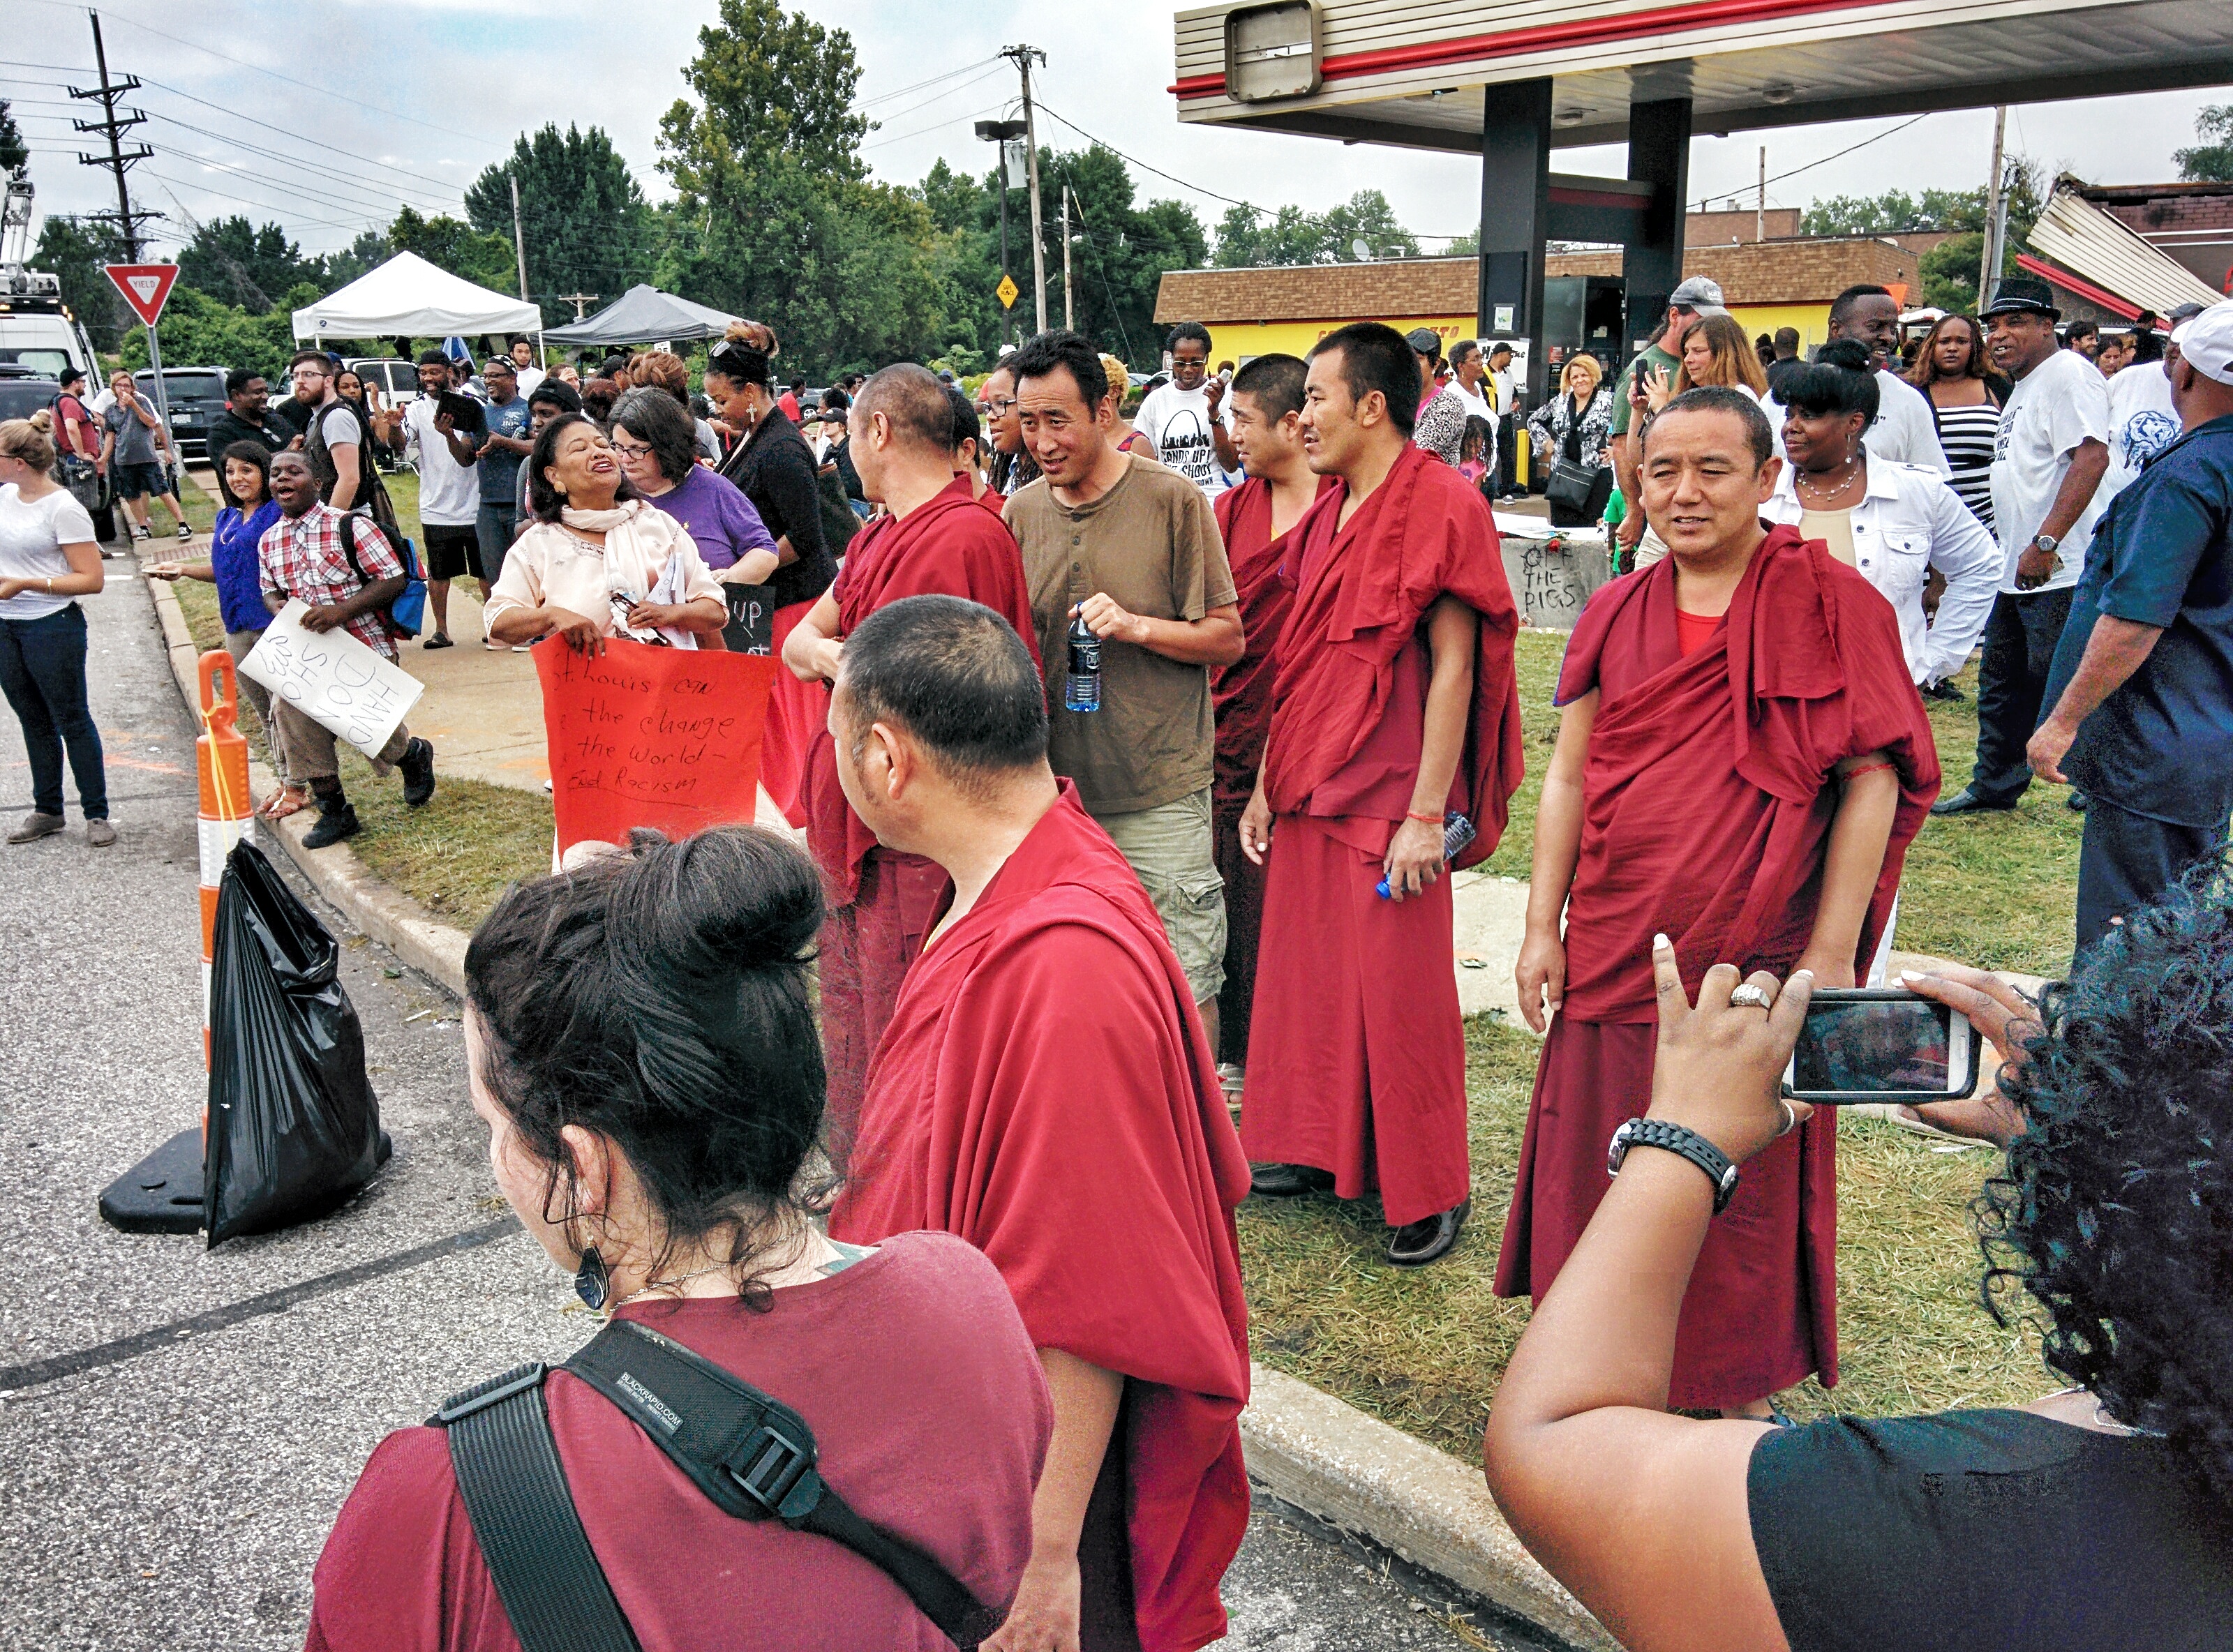 Tibetan Monks in Ferguson at peaceful protest.  Images by Omar O'Hara